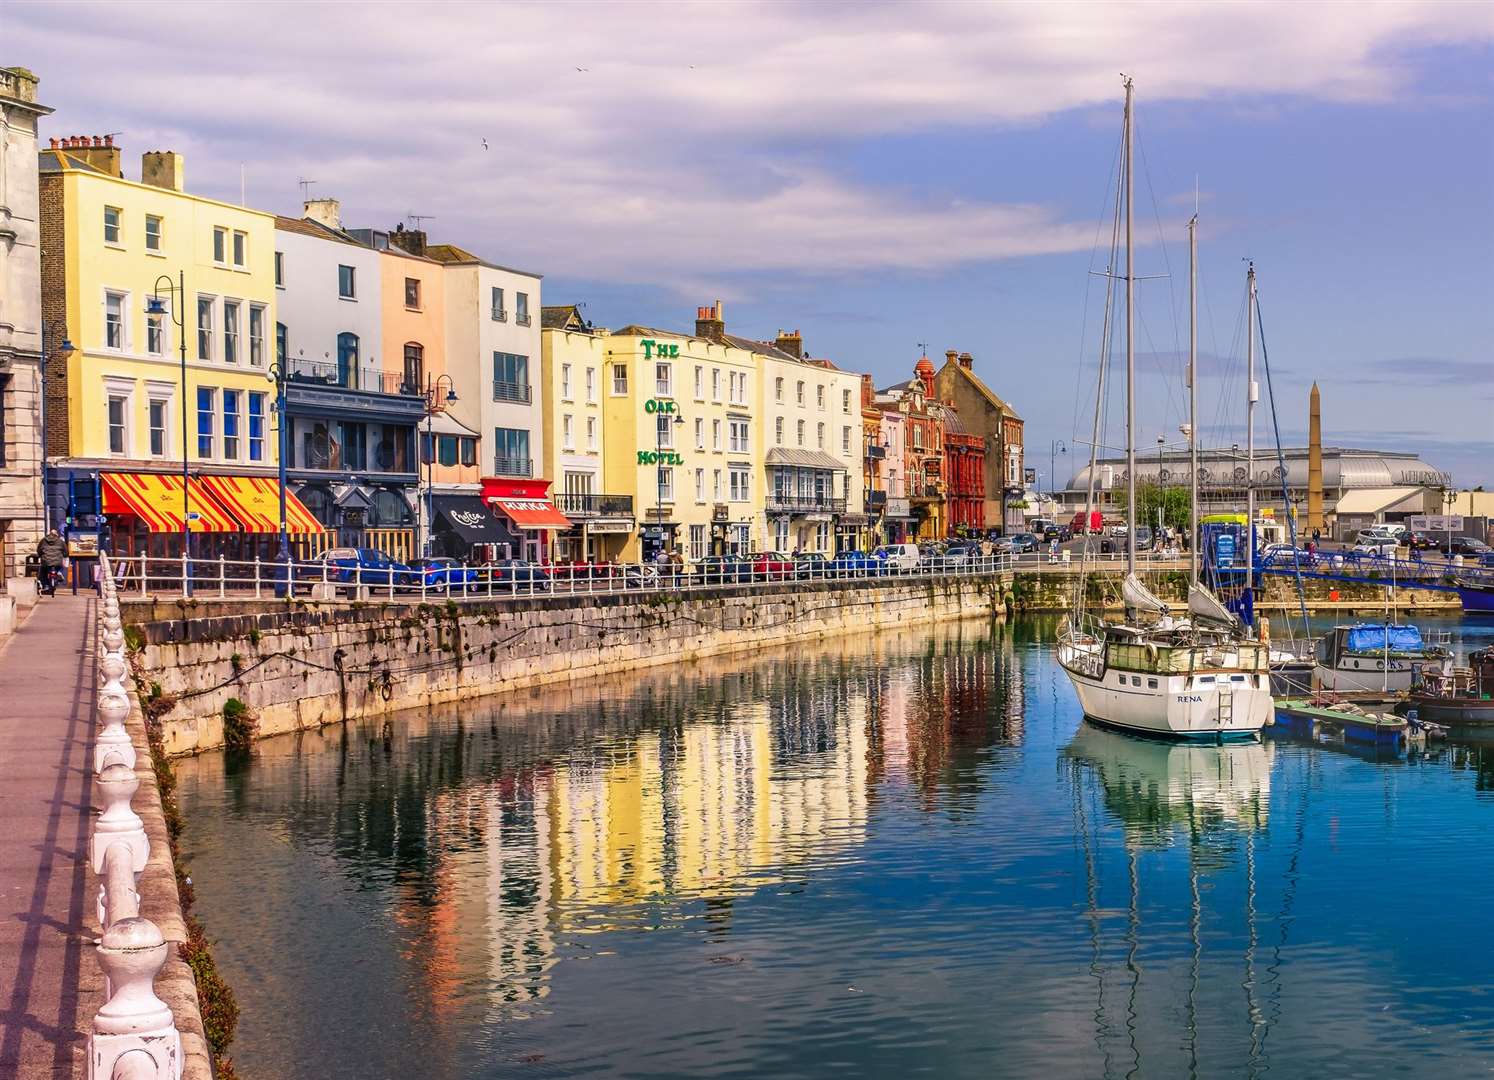 The picturesque harbourside cafes in Ramsgate